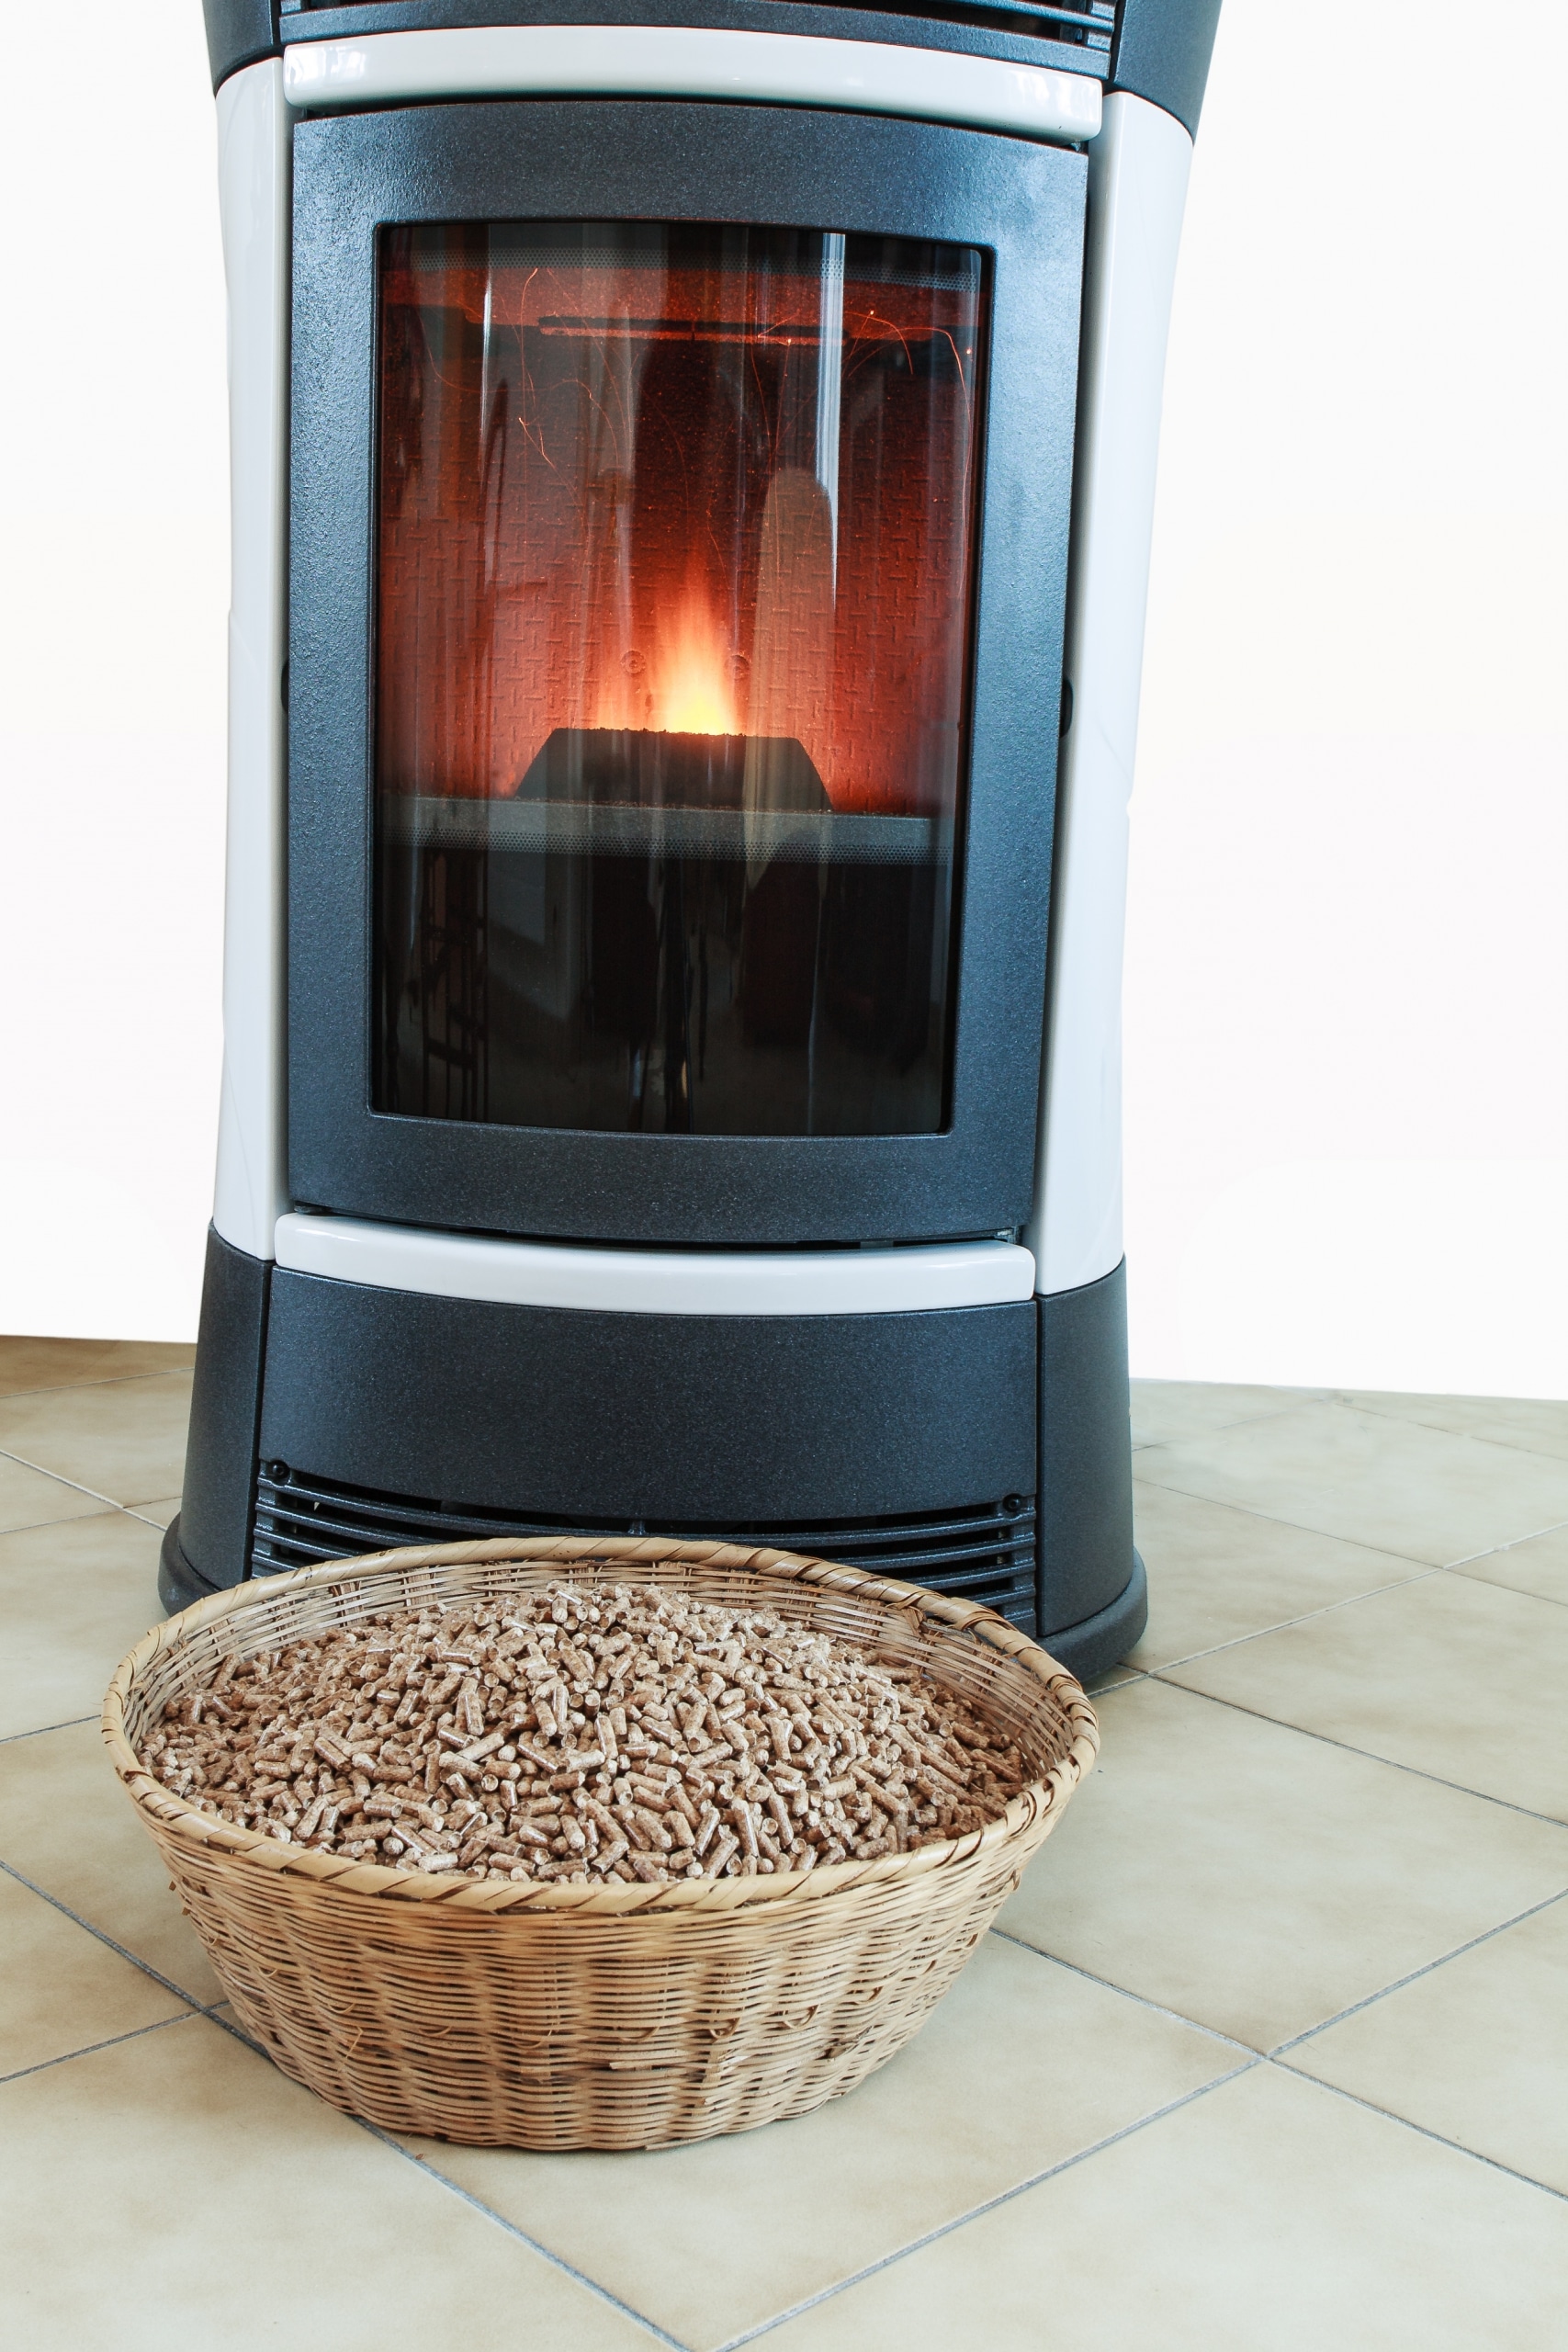 Do Pellet Stoves Qualify For Energy Tax Credit